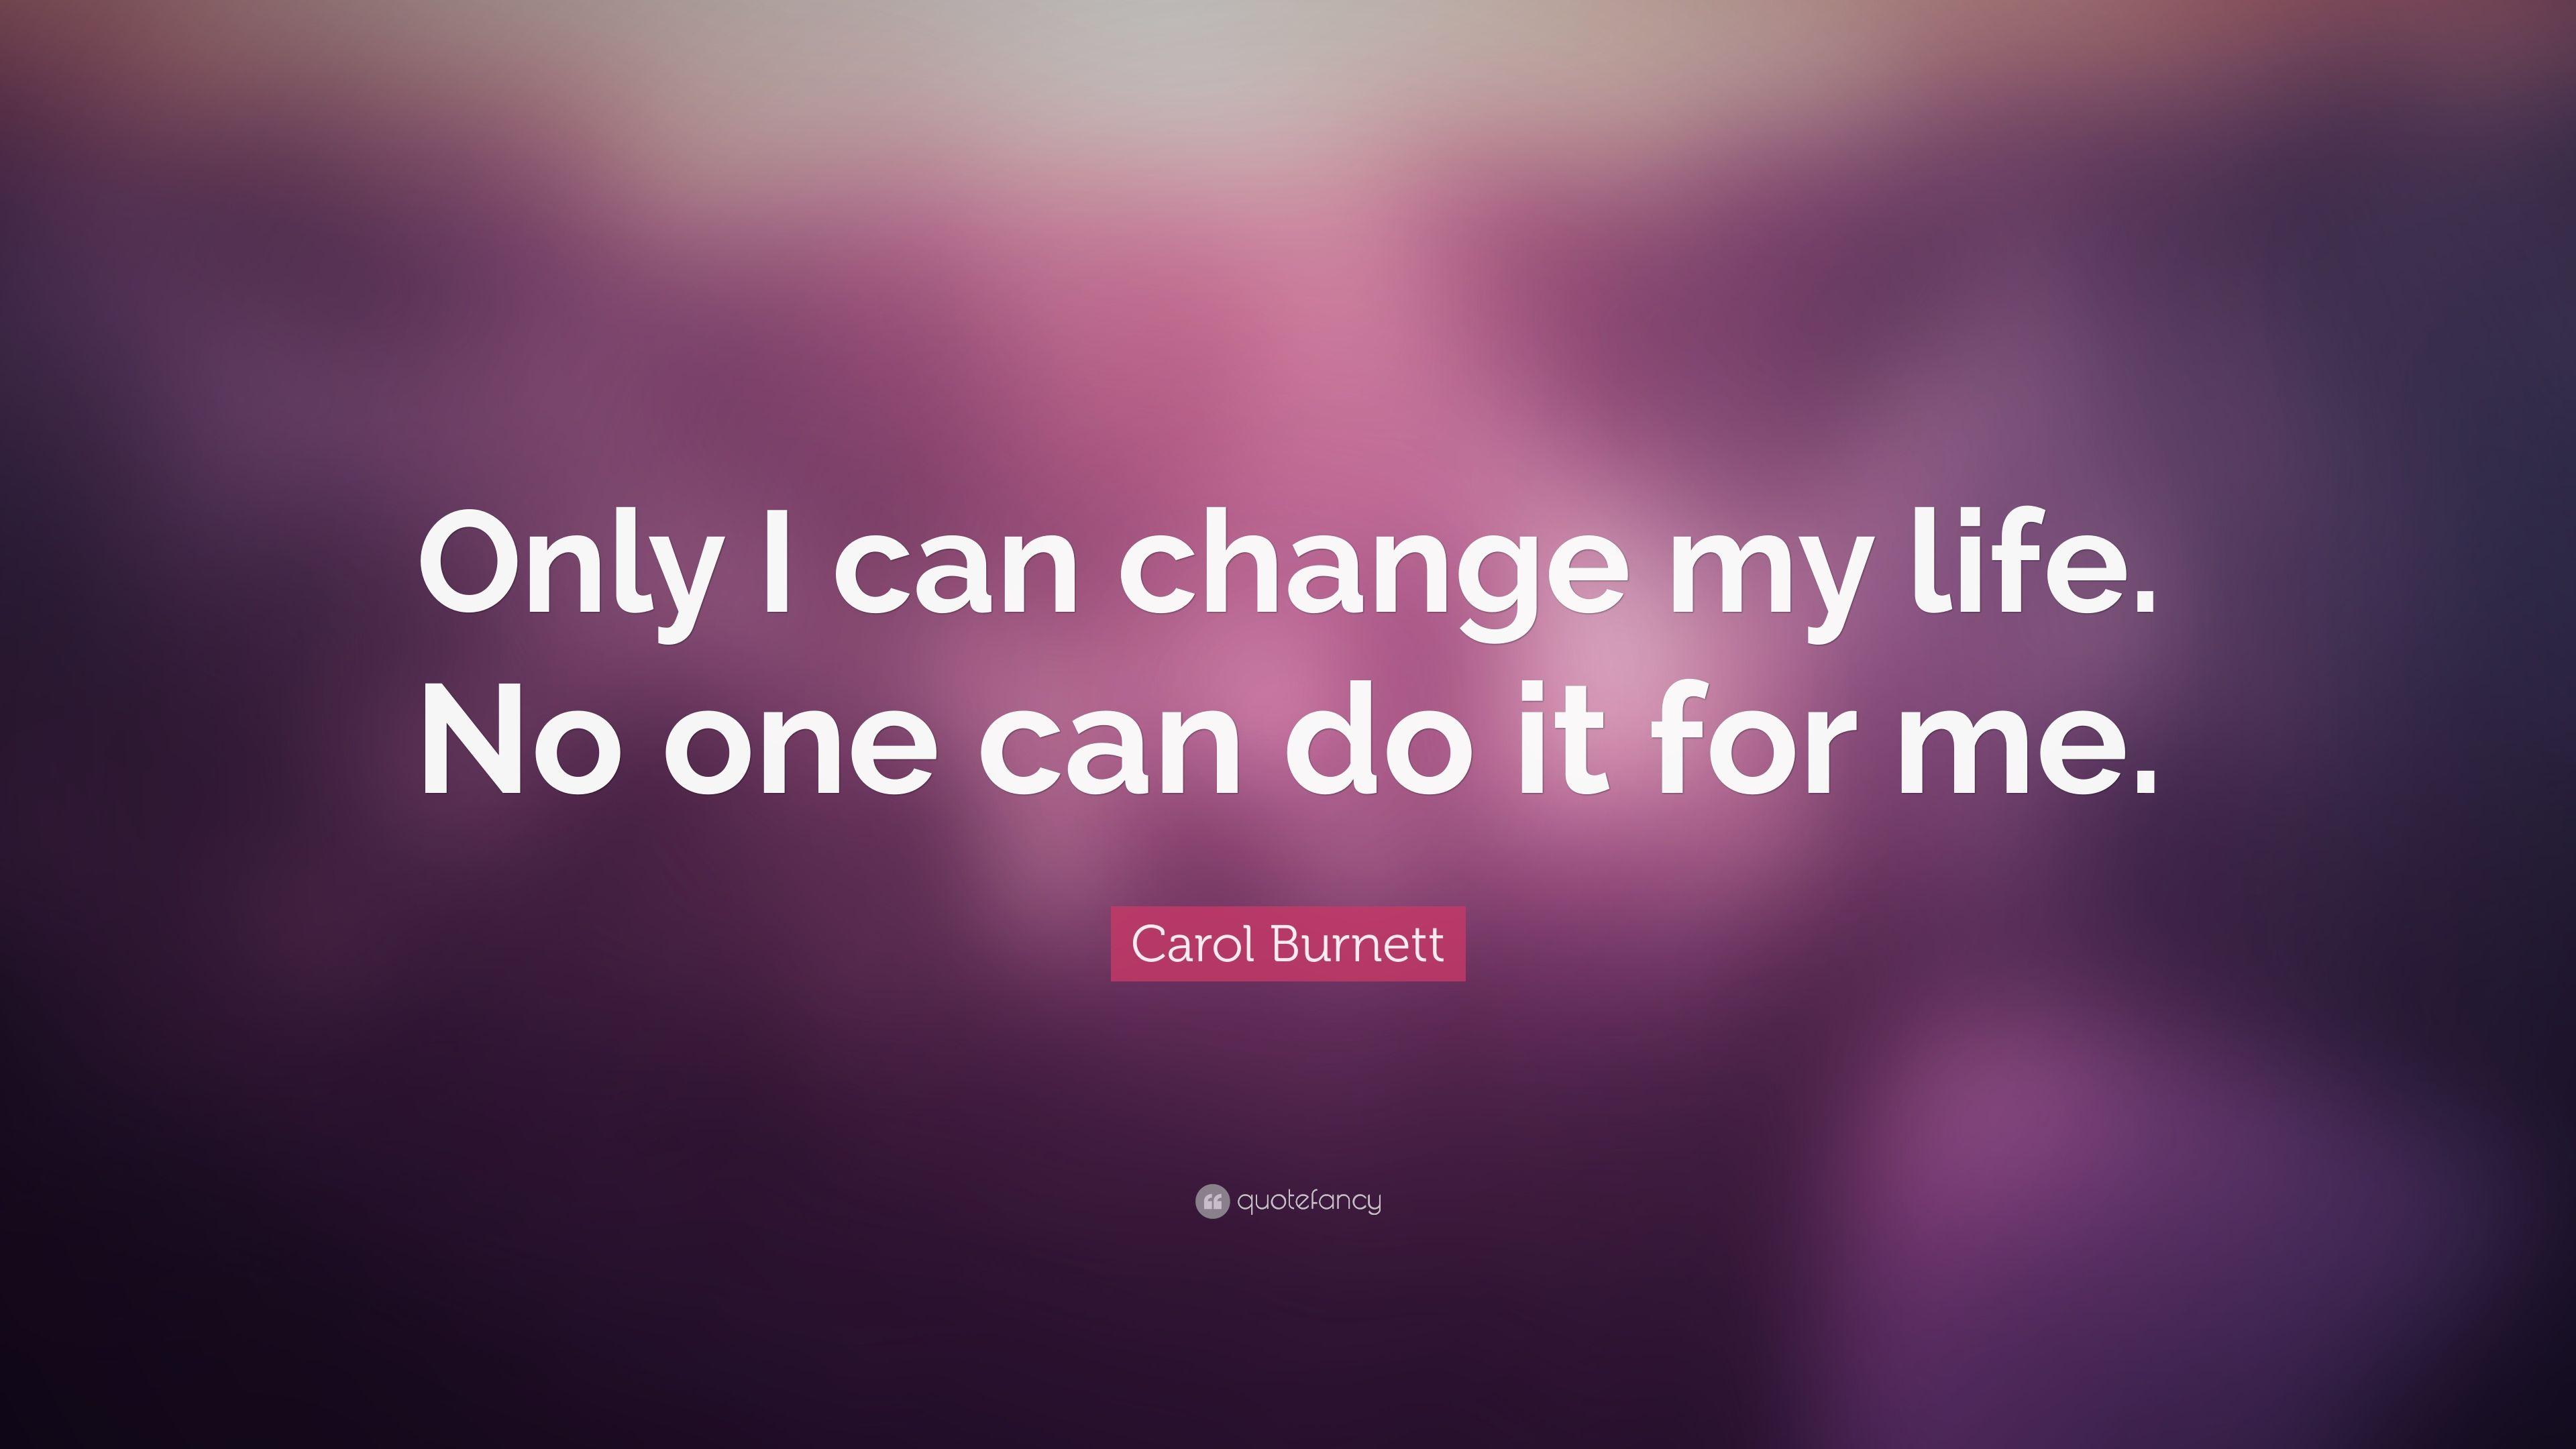 Carol Burnett Quote: “Only I can change my life. No one can do it for me.” (25 wallpaper)